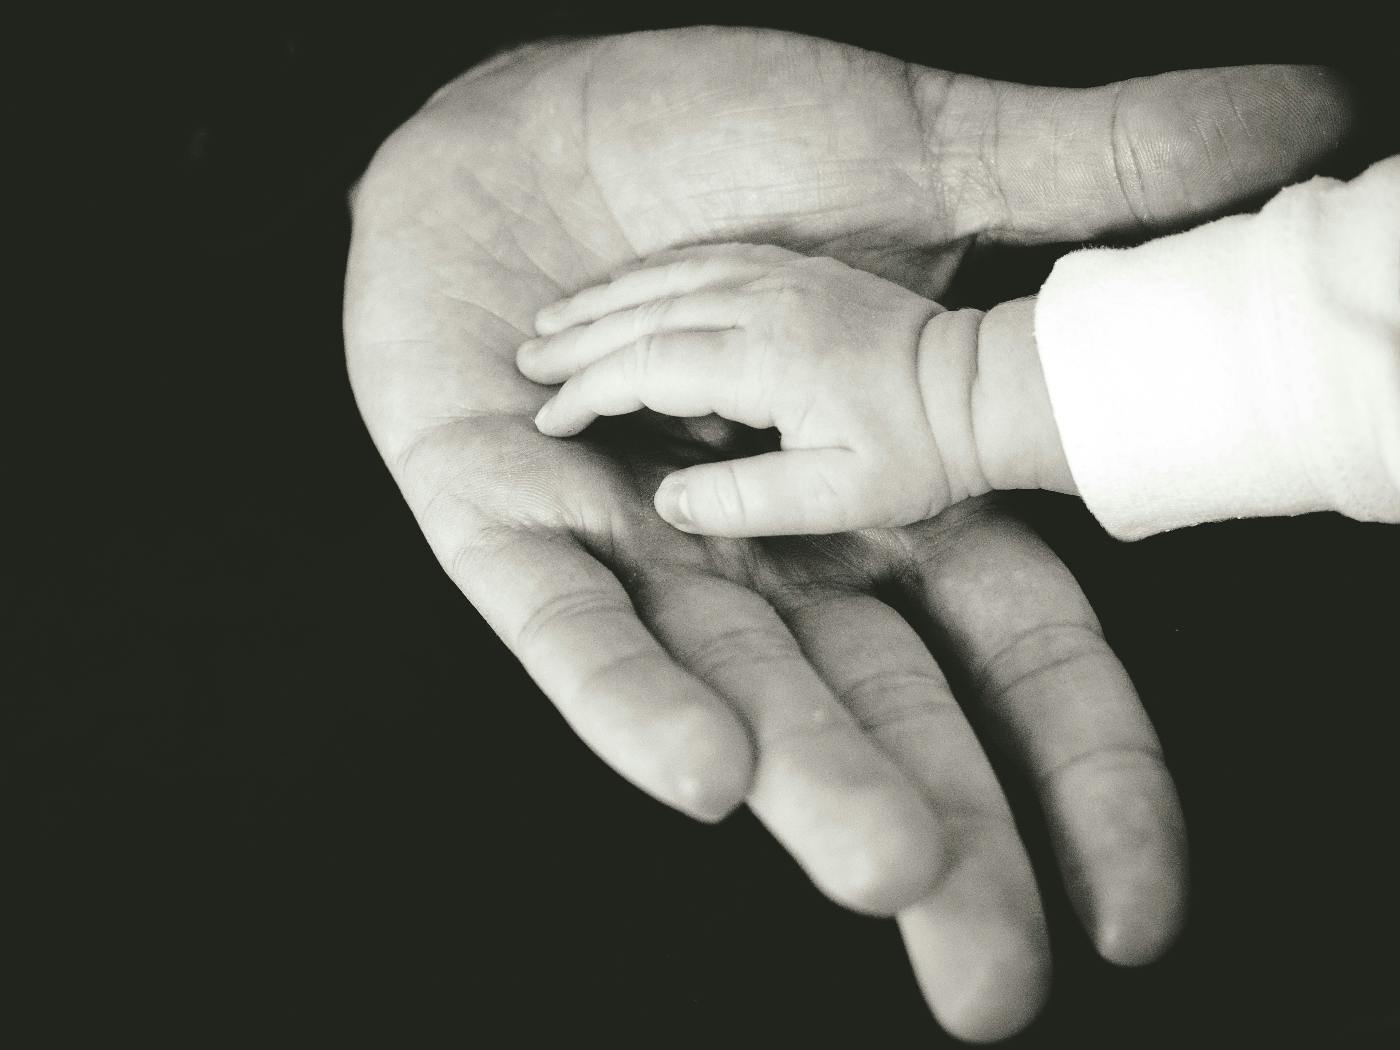 A child's hand resting in the palm of an adult's hand